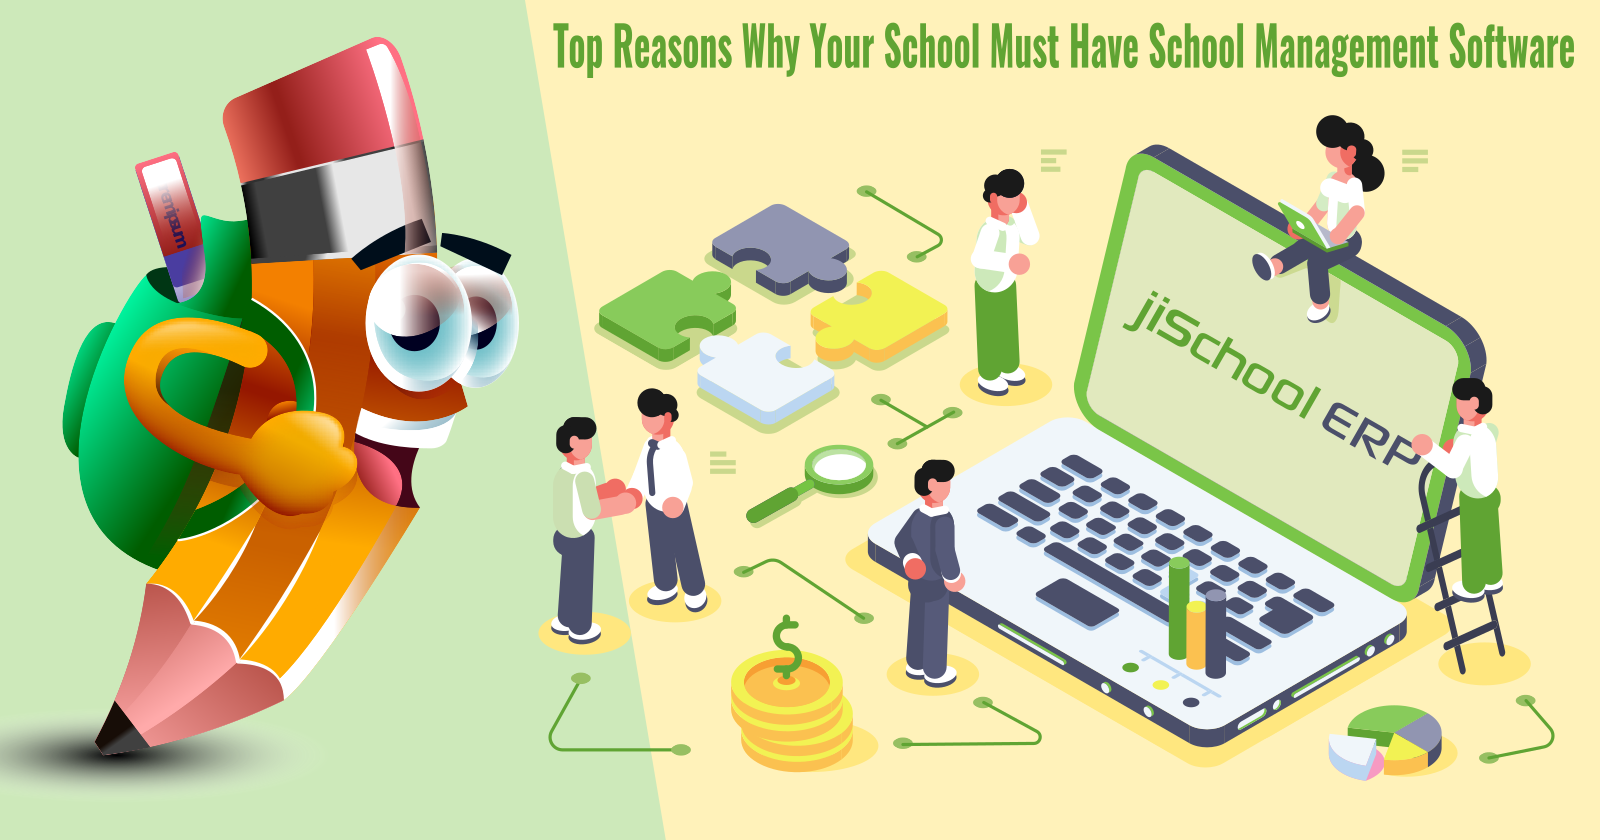 Top Reasons Why Your School Must Have School Management Software